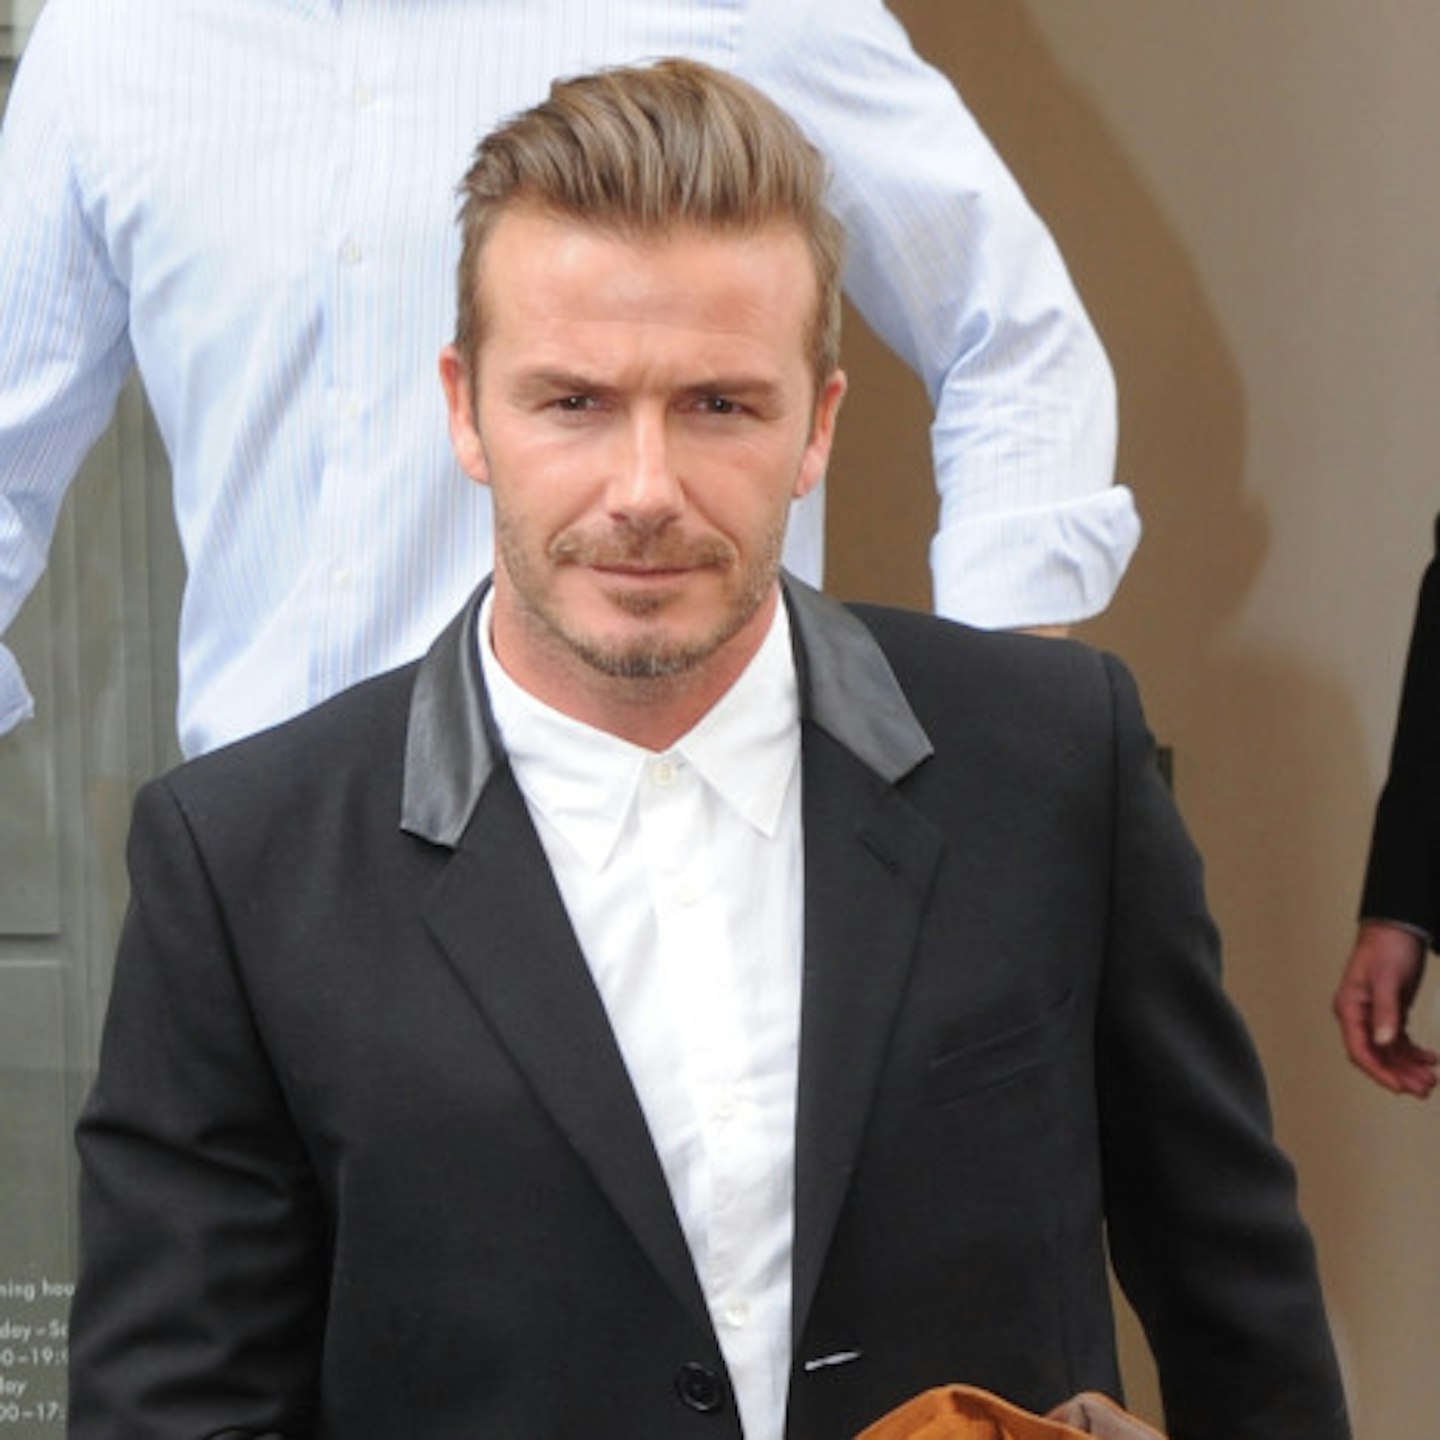 David Beckham attended the launch of his wife's new store